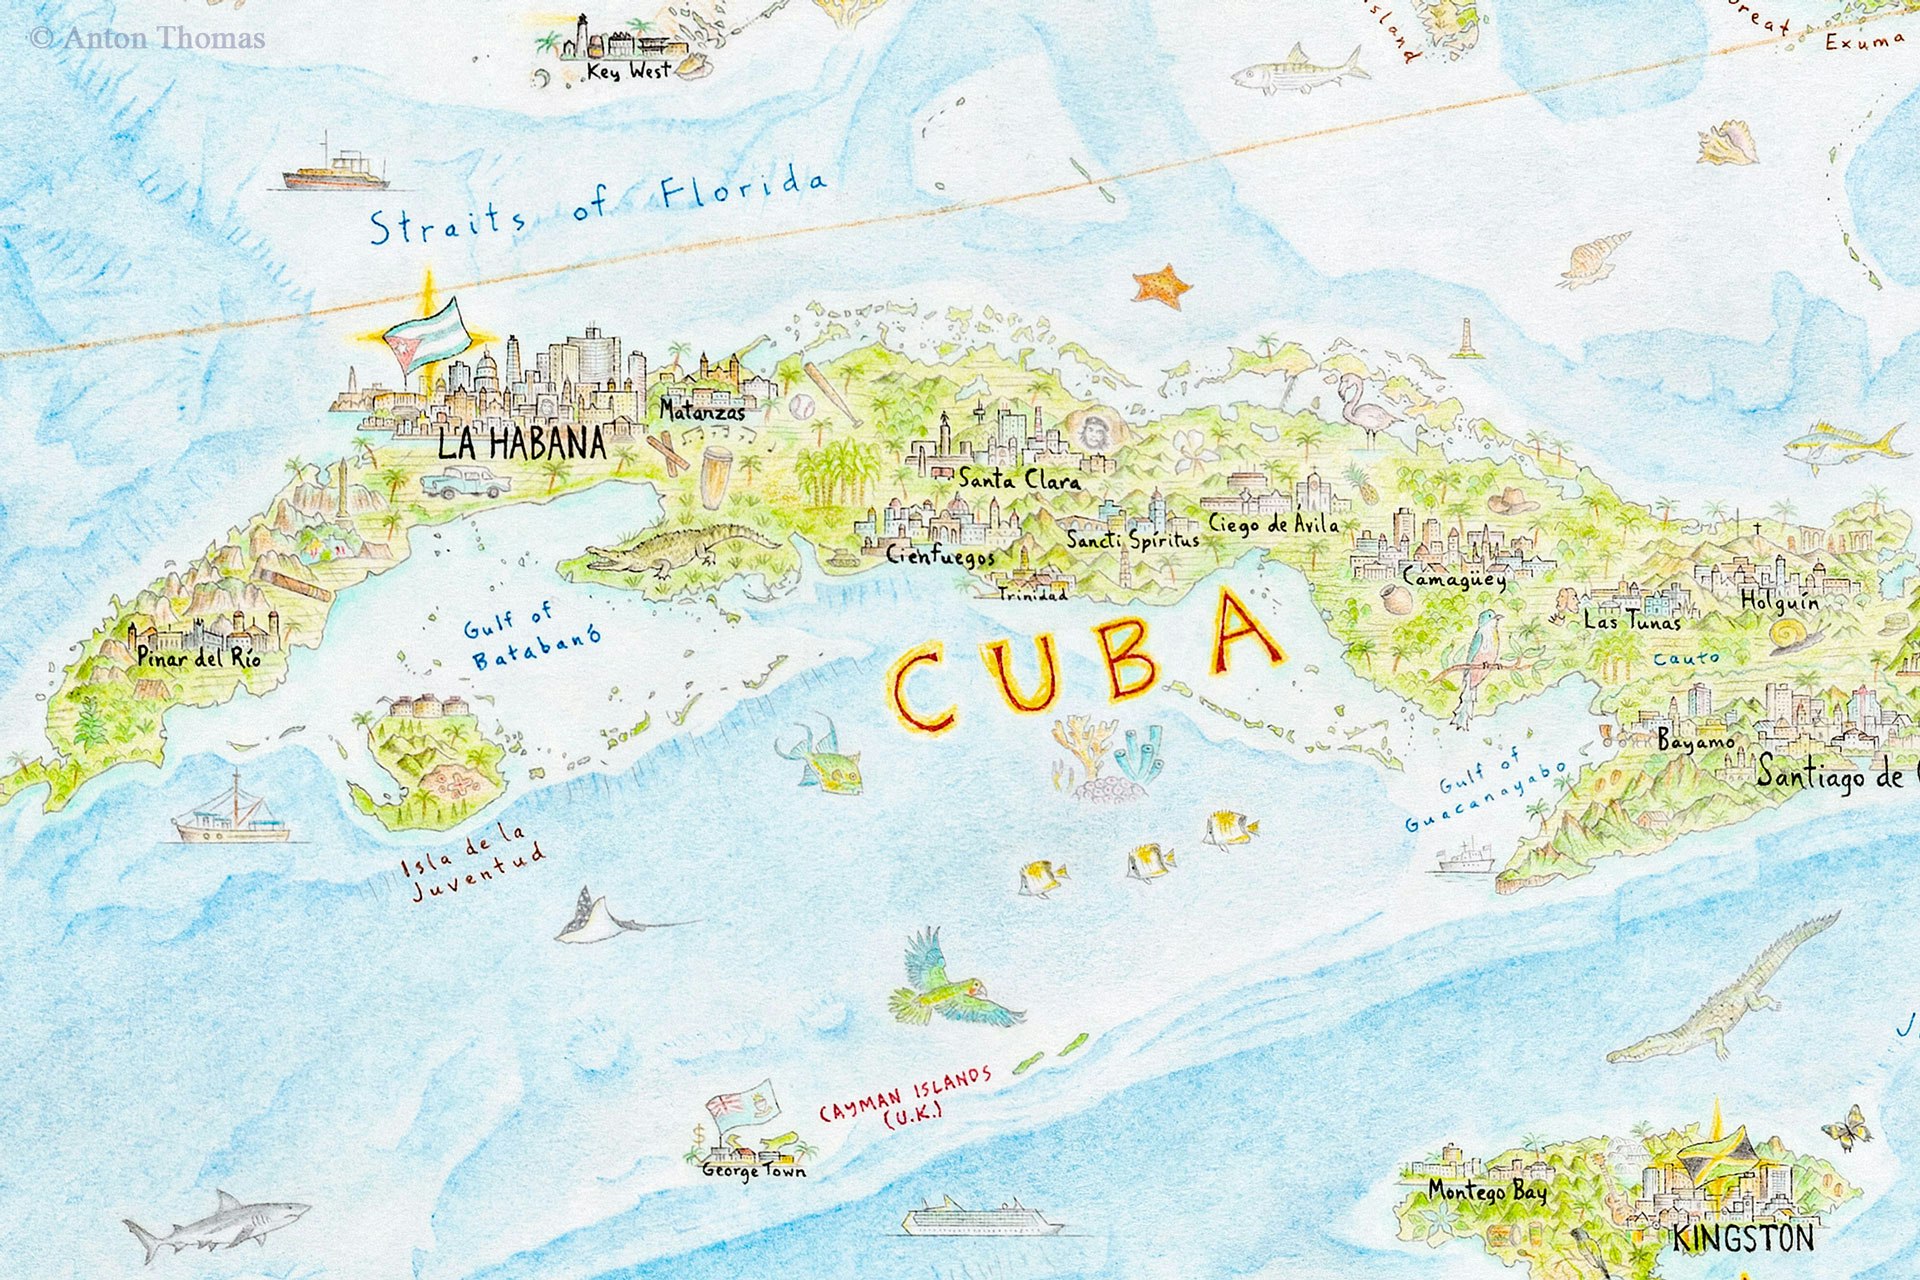 A detail of the map in the Cuba region